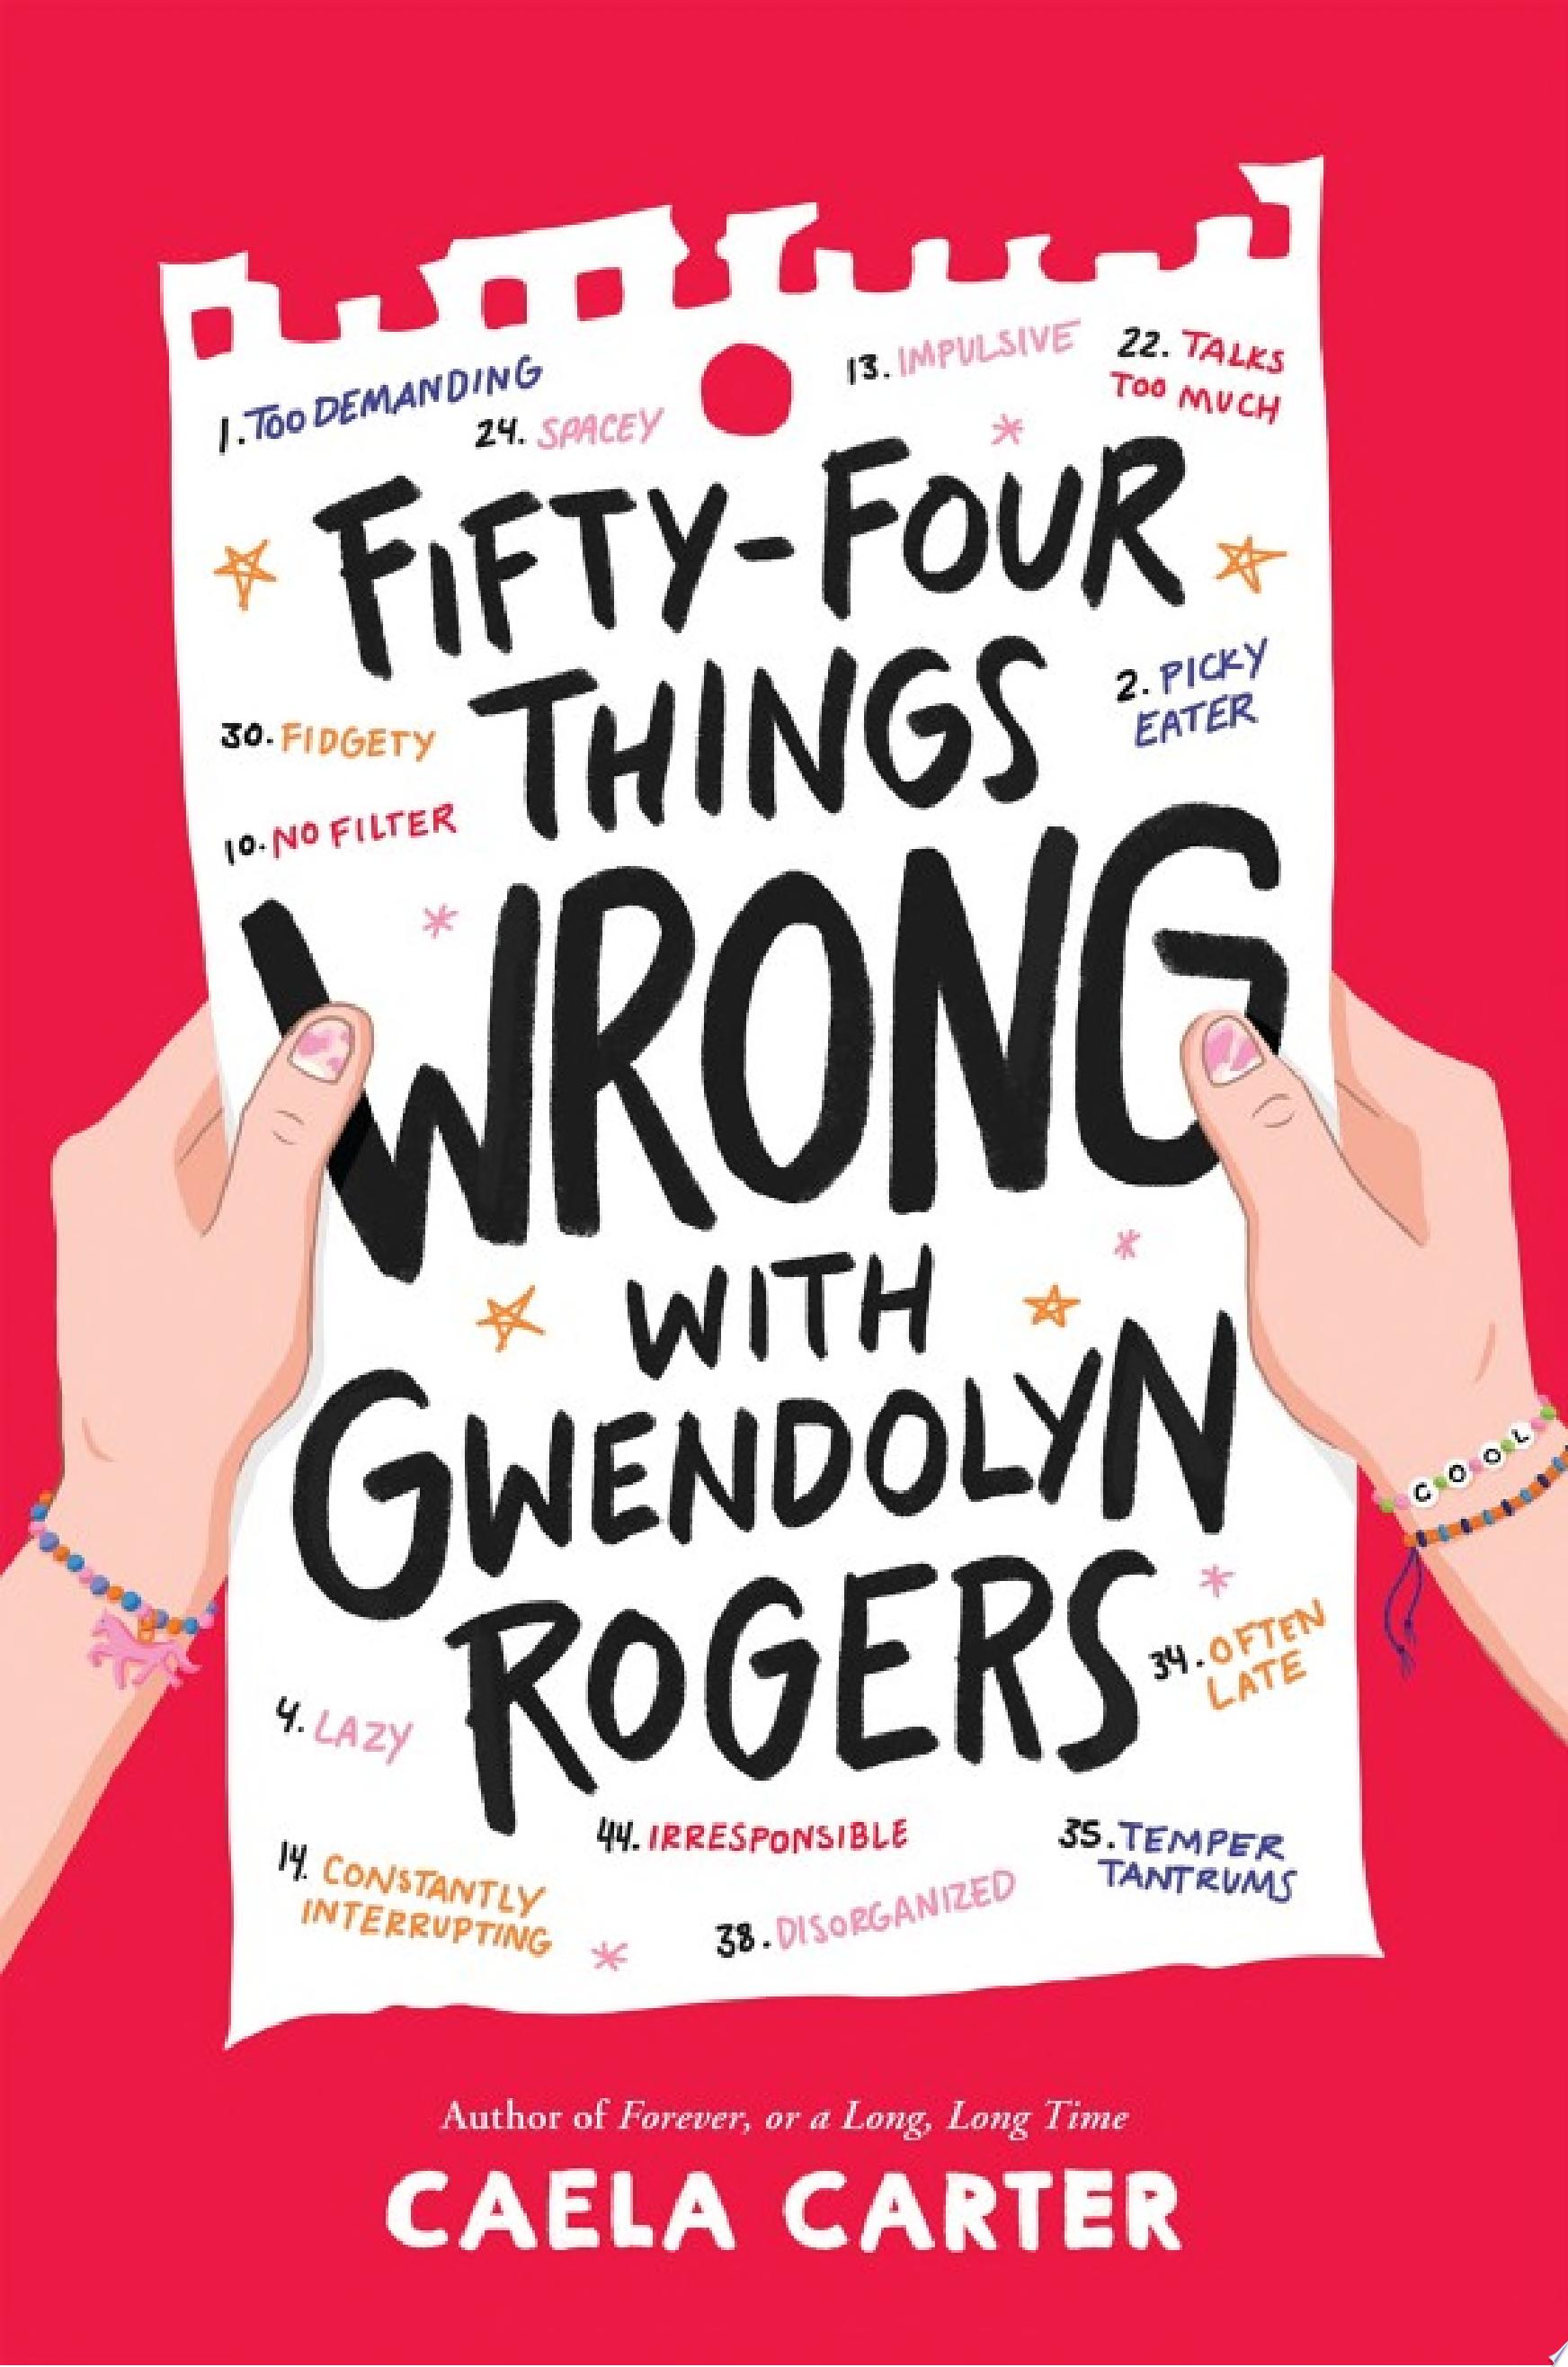 Image for "Fifty-Four Things Wrong with Gwendolyn Rogers"